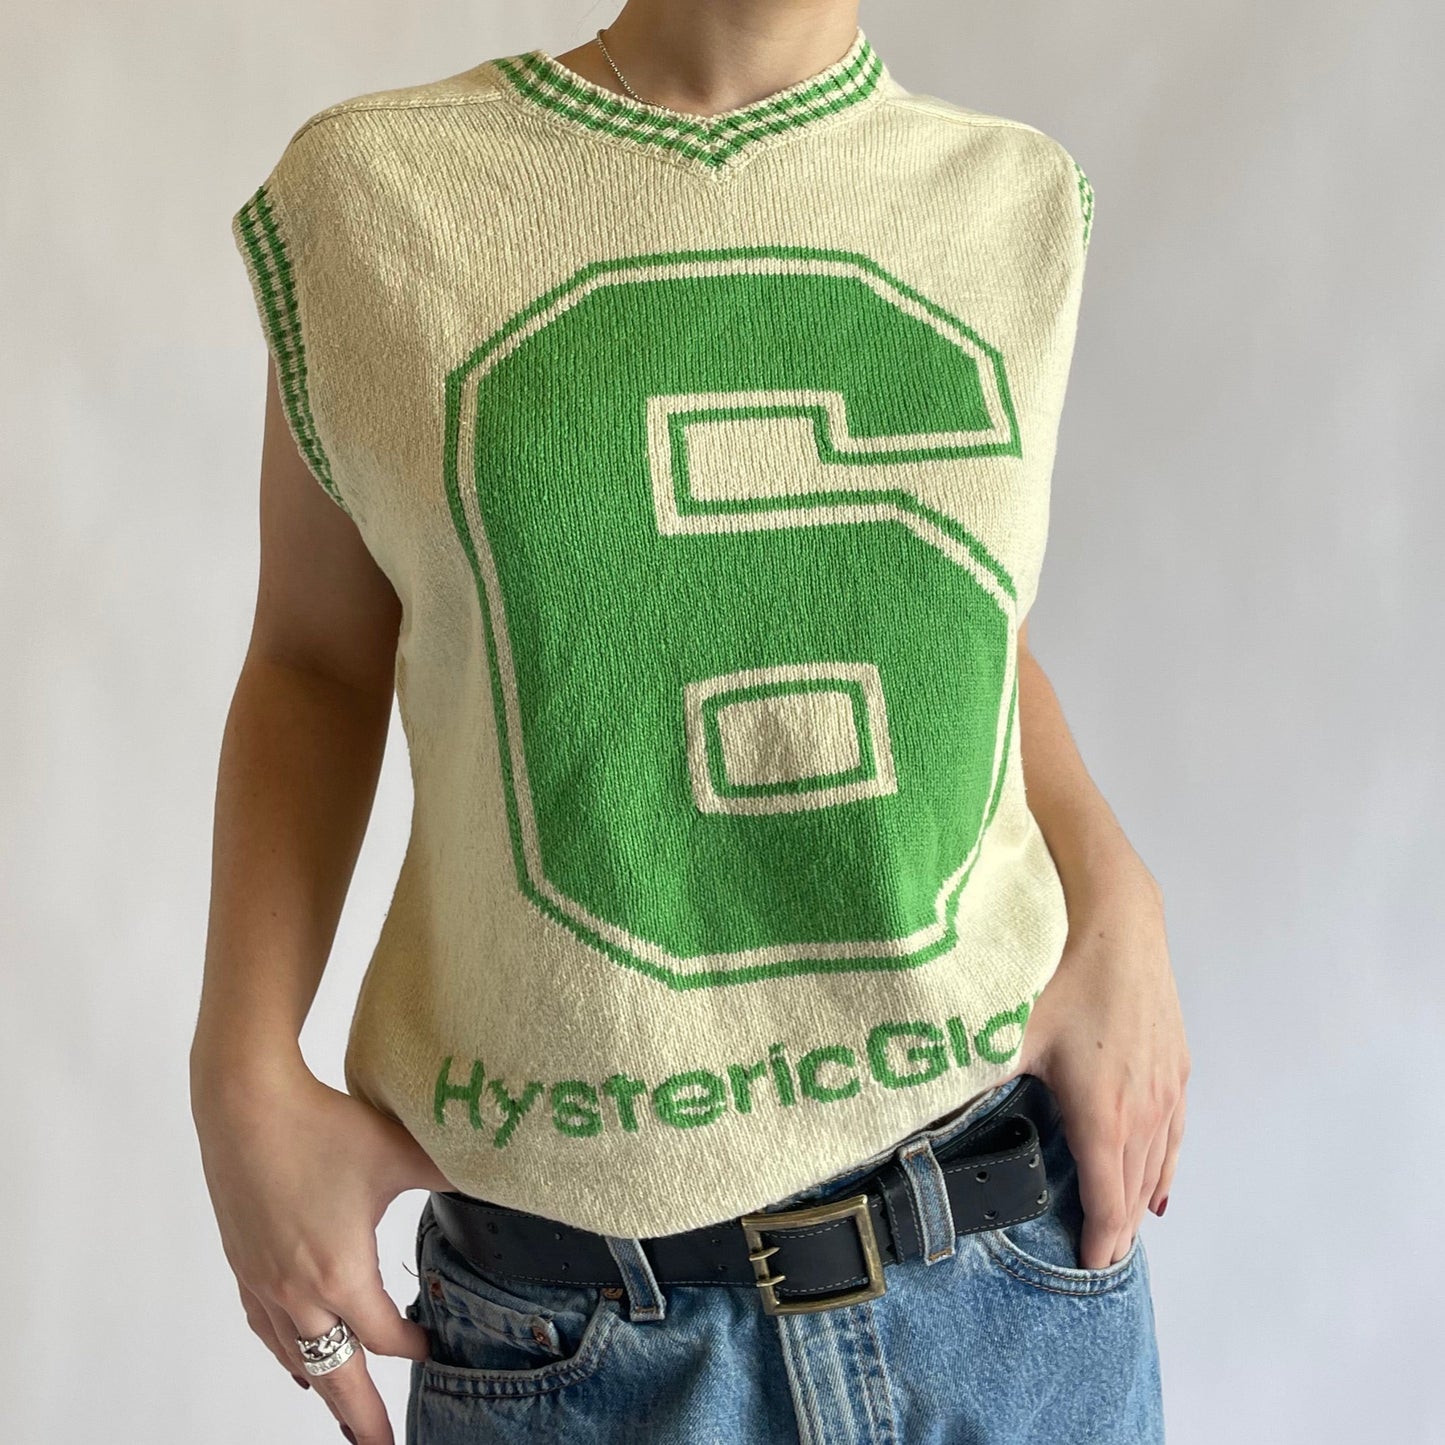 hysteric glamour sweater vest